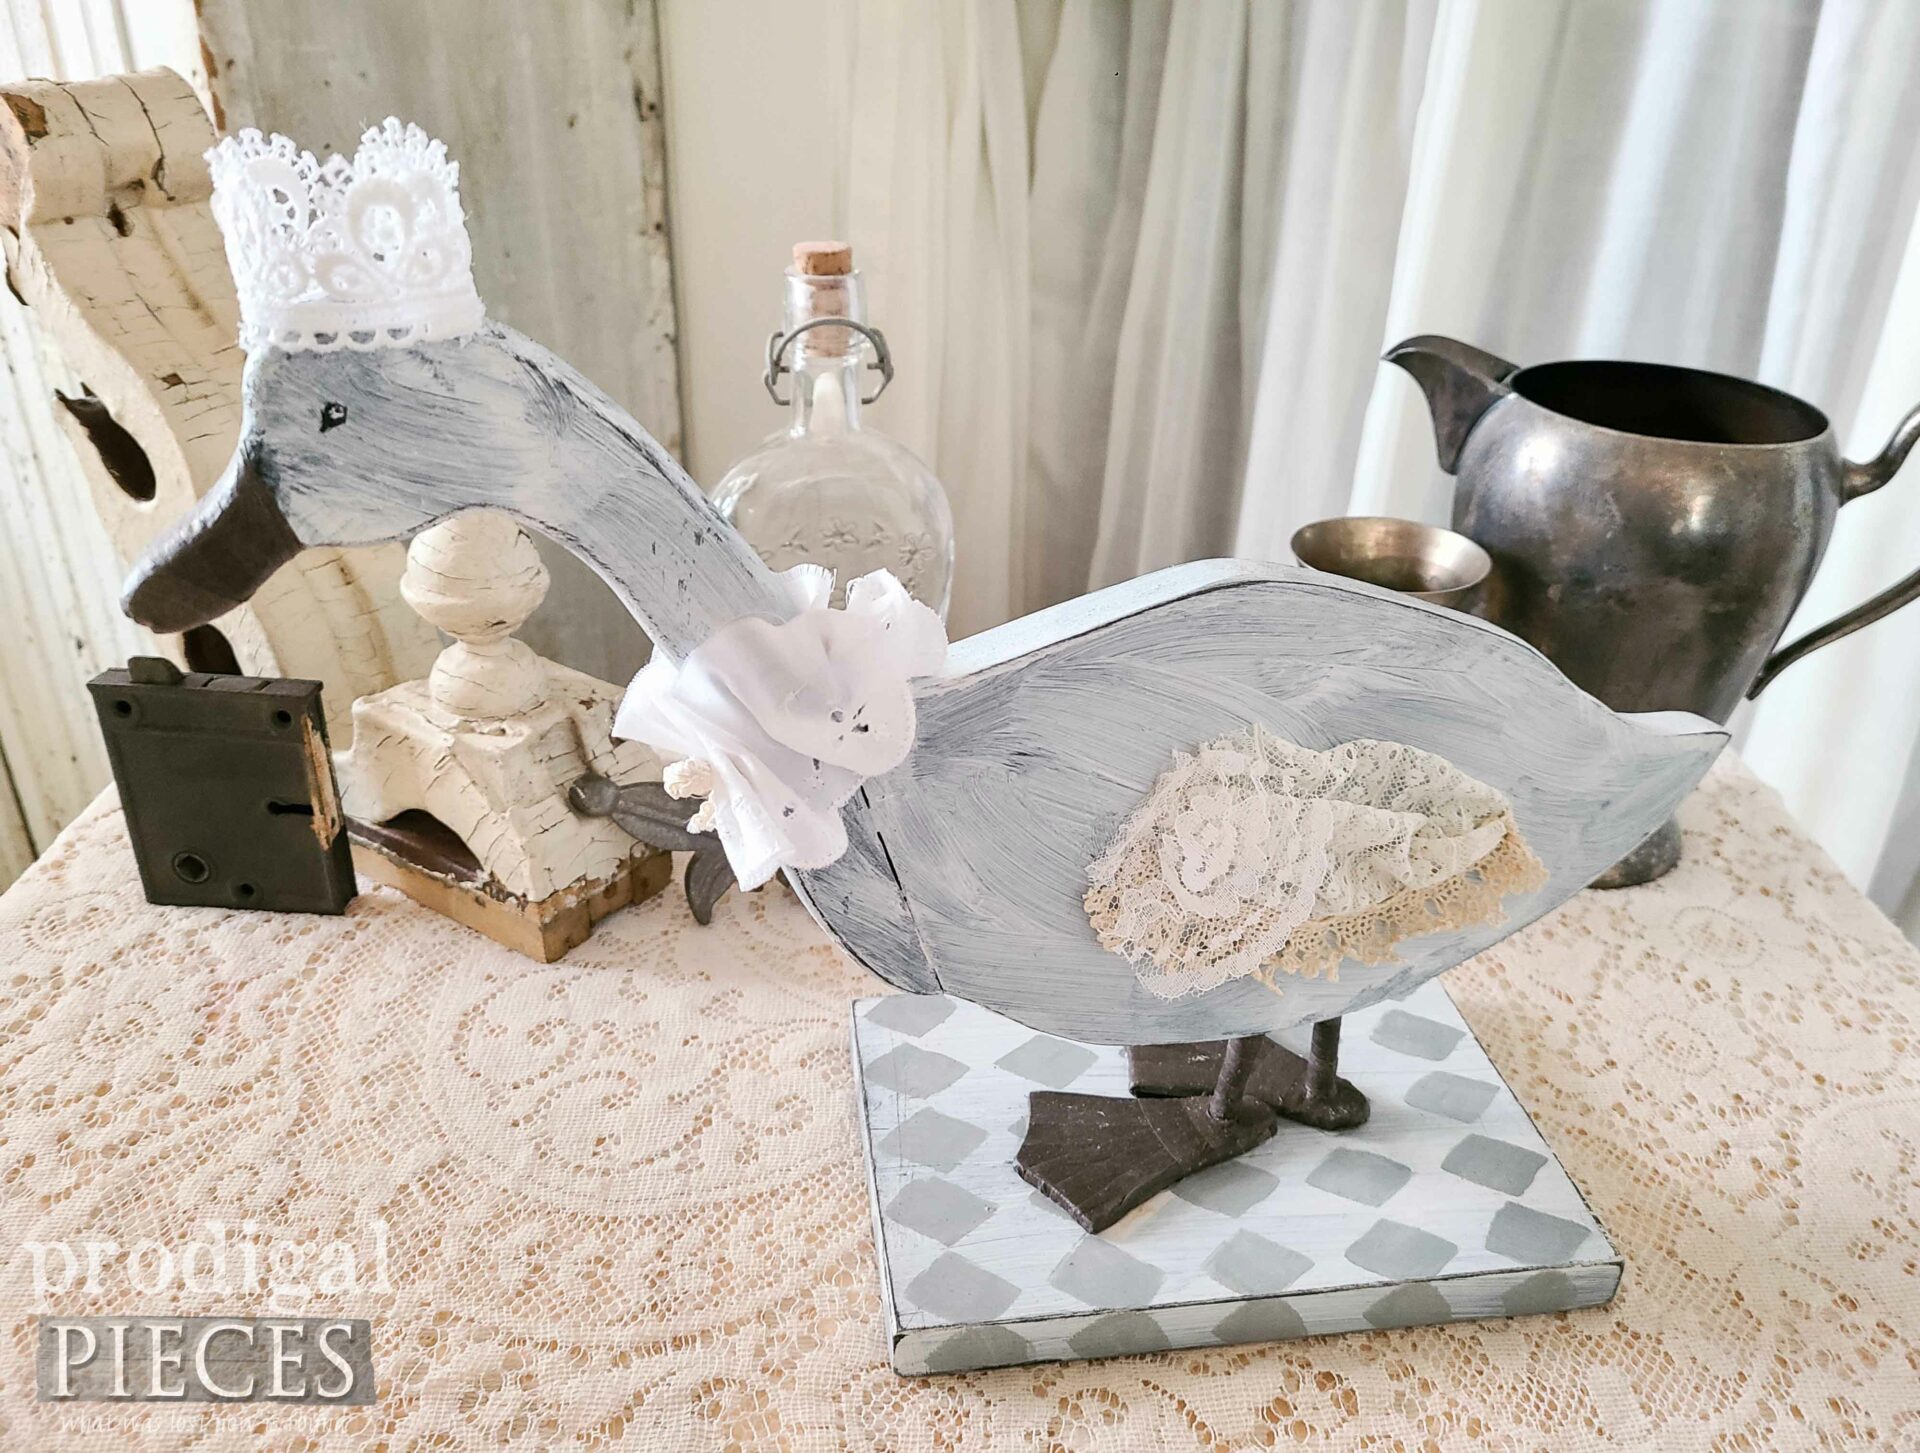 Textile Shabby Chic Goose with Lace Accents by Larissa of Prodigal Pieces | prodigalpieces.com #prodigalpieces #shabbychic #french #vintage